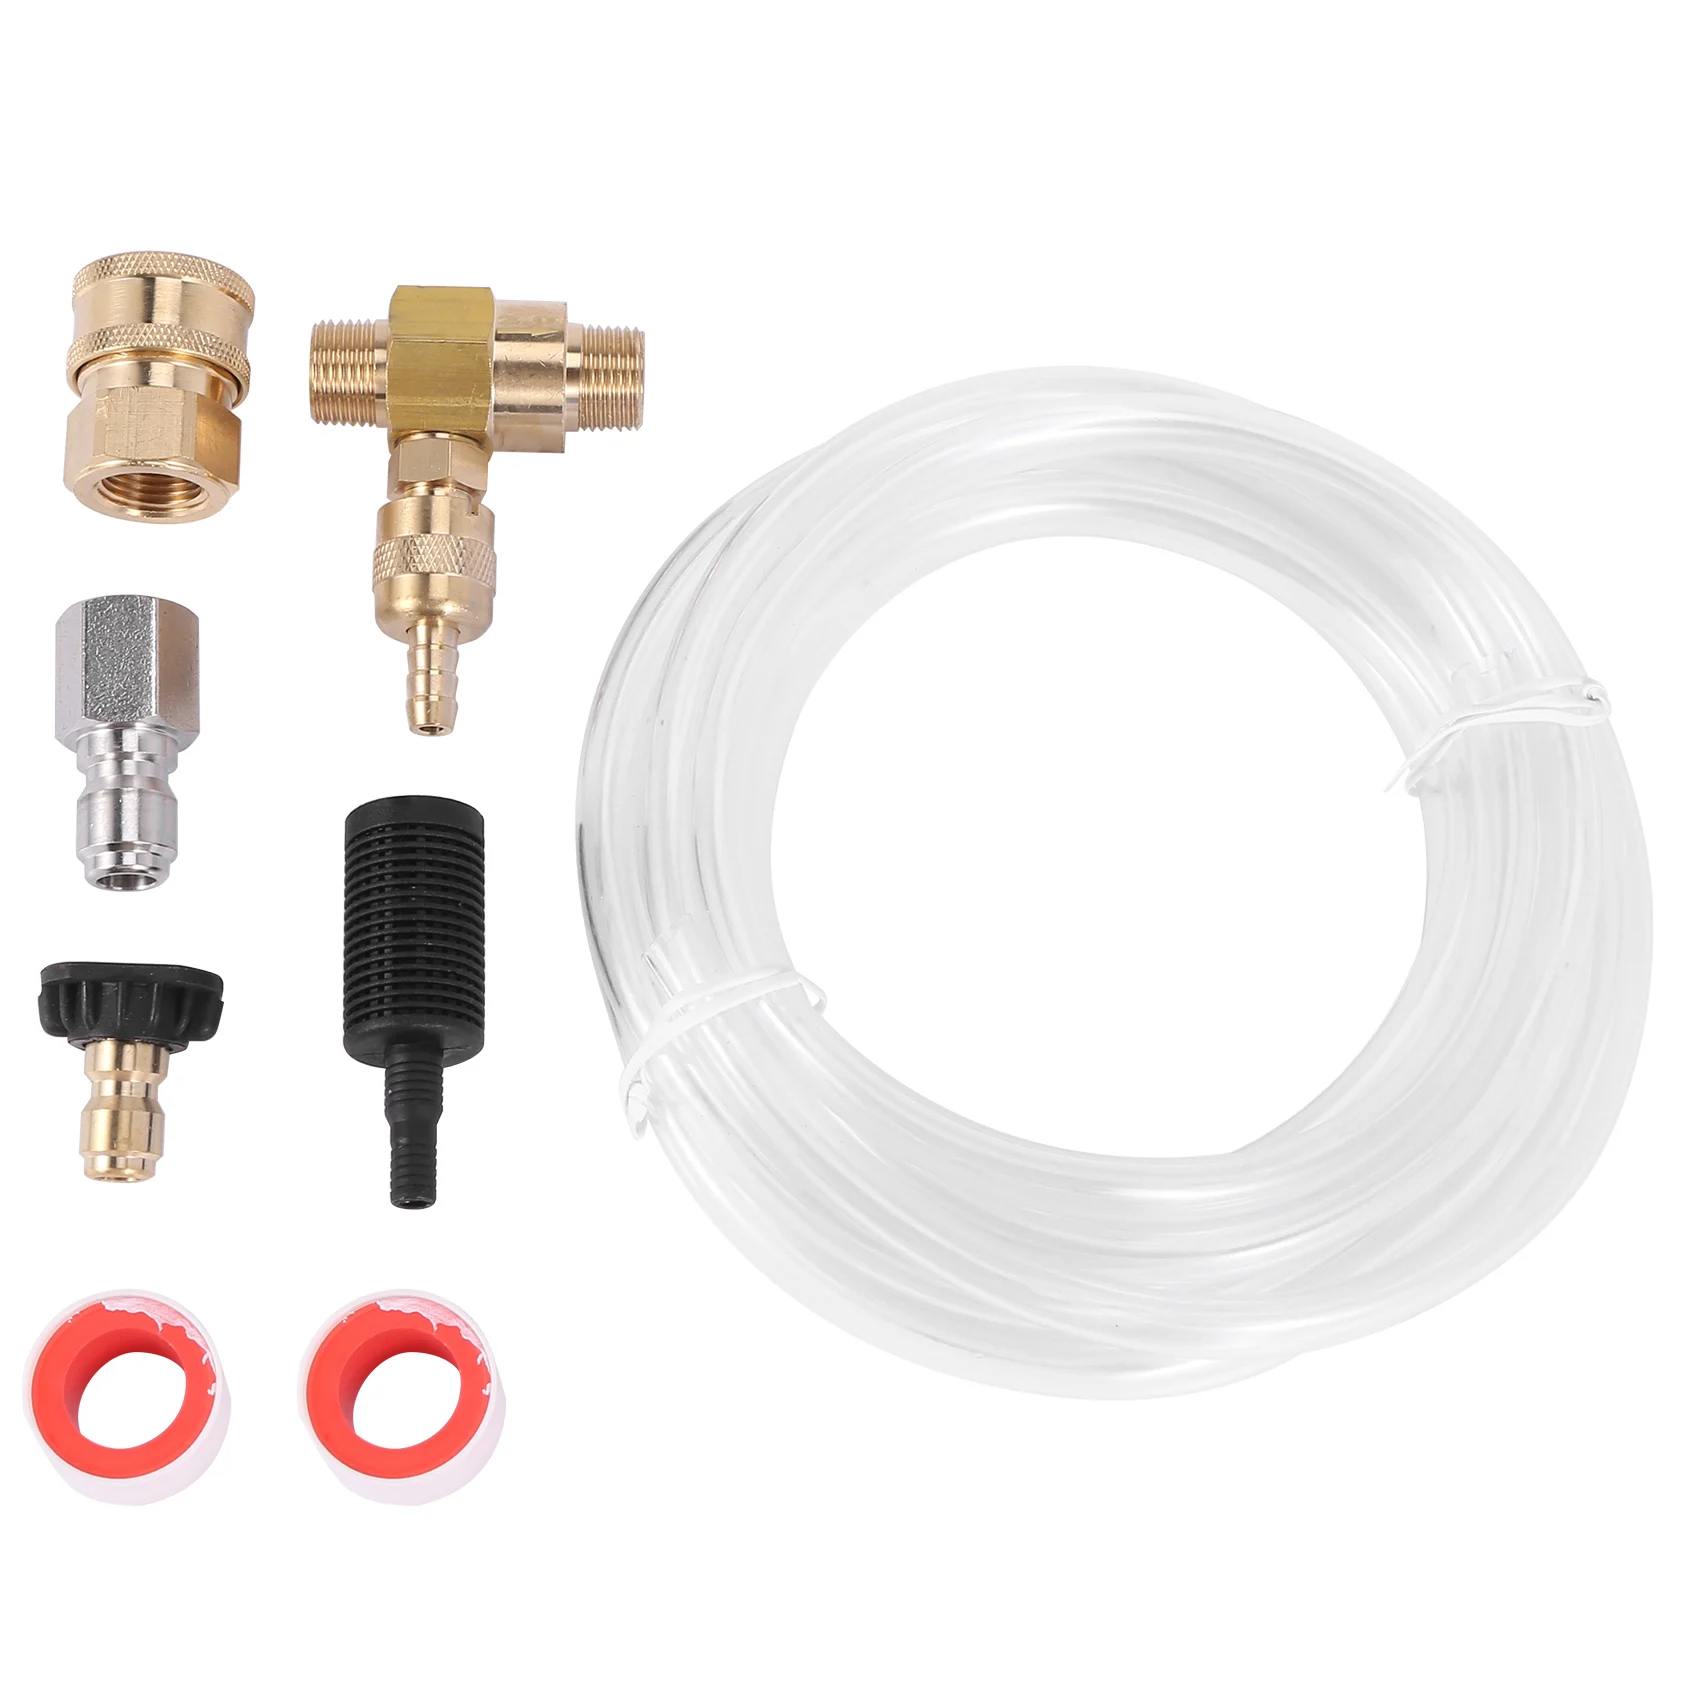 

Pressure Washer Chemical Injector Kit Adjustable Soap Dispenser, 3/8 Inch Quick Connect, 10 Ft Siphon Hose, Come with 1 pcs